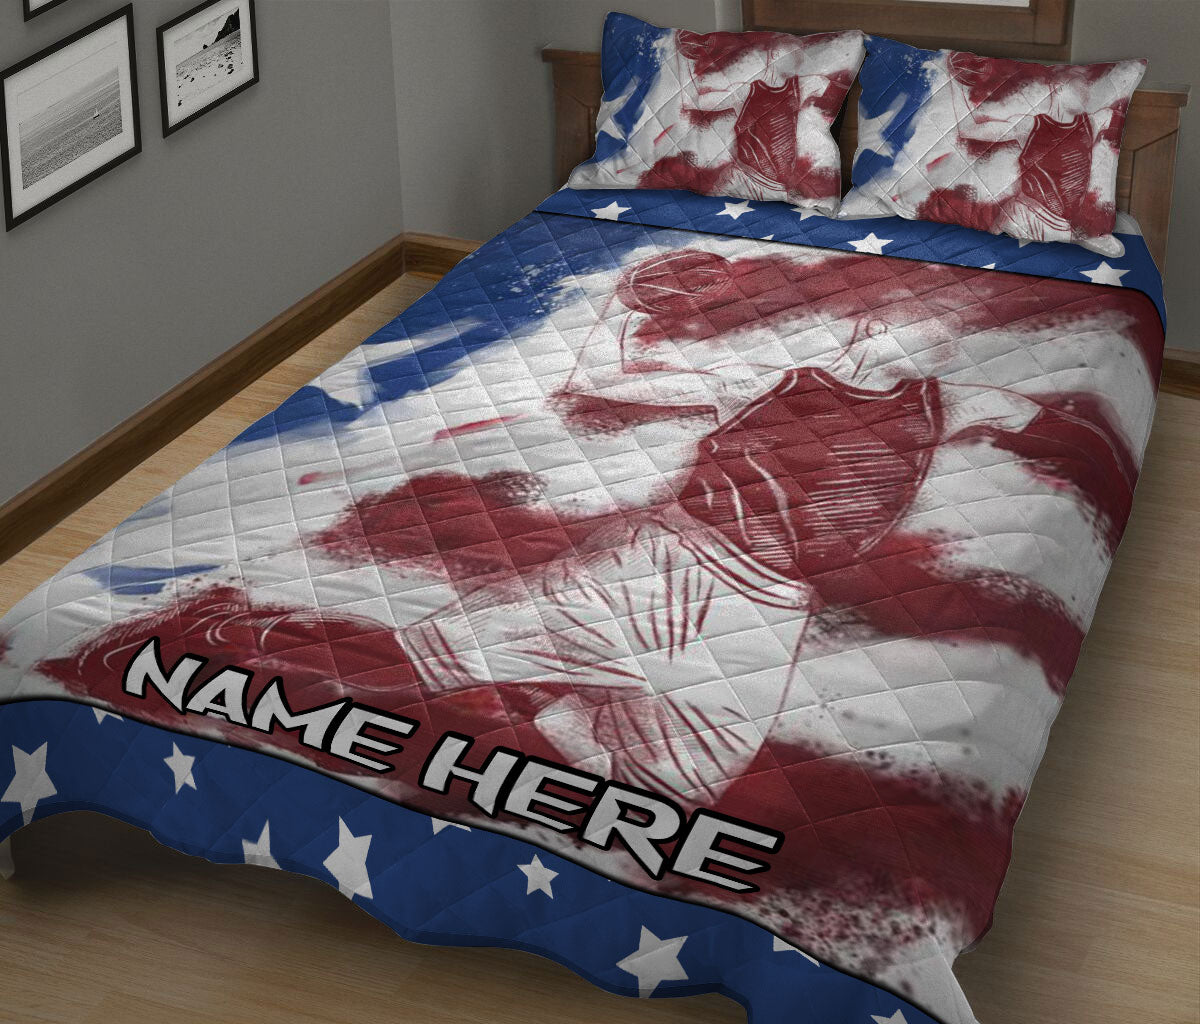 Ohaprints-Quilt-Bed-Set-Pillowcase-Basketball-Player-American-Us-Flag-Sports-Lover-Gift-Custom-Personalized-Name-Blanket-Bedspread-Bedding-2111-King (90'' x 100'')